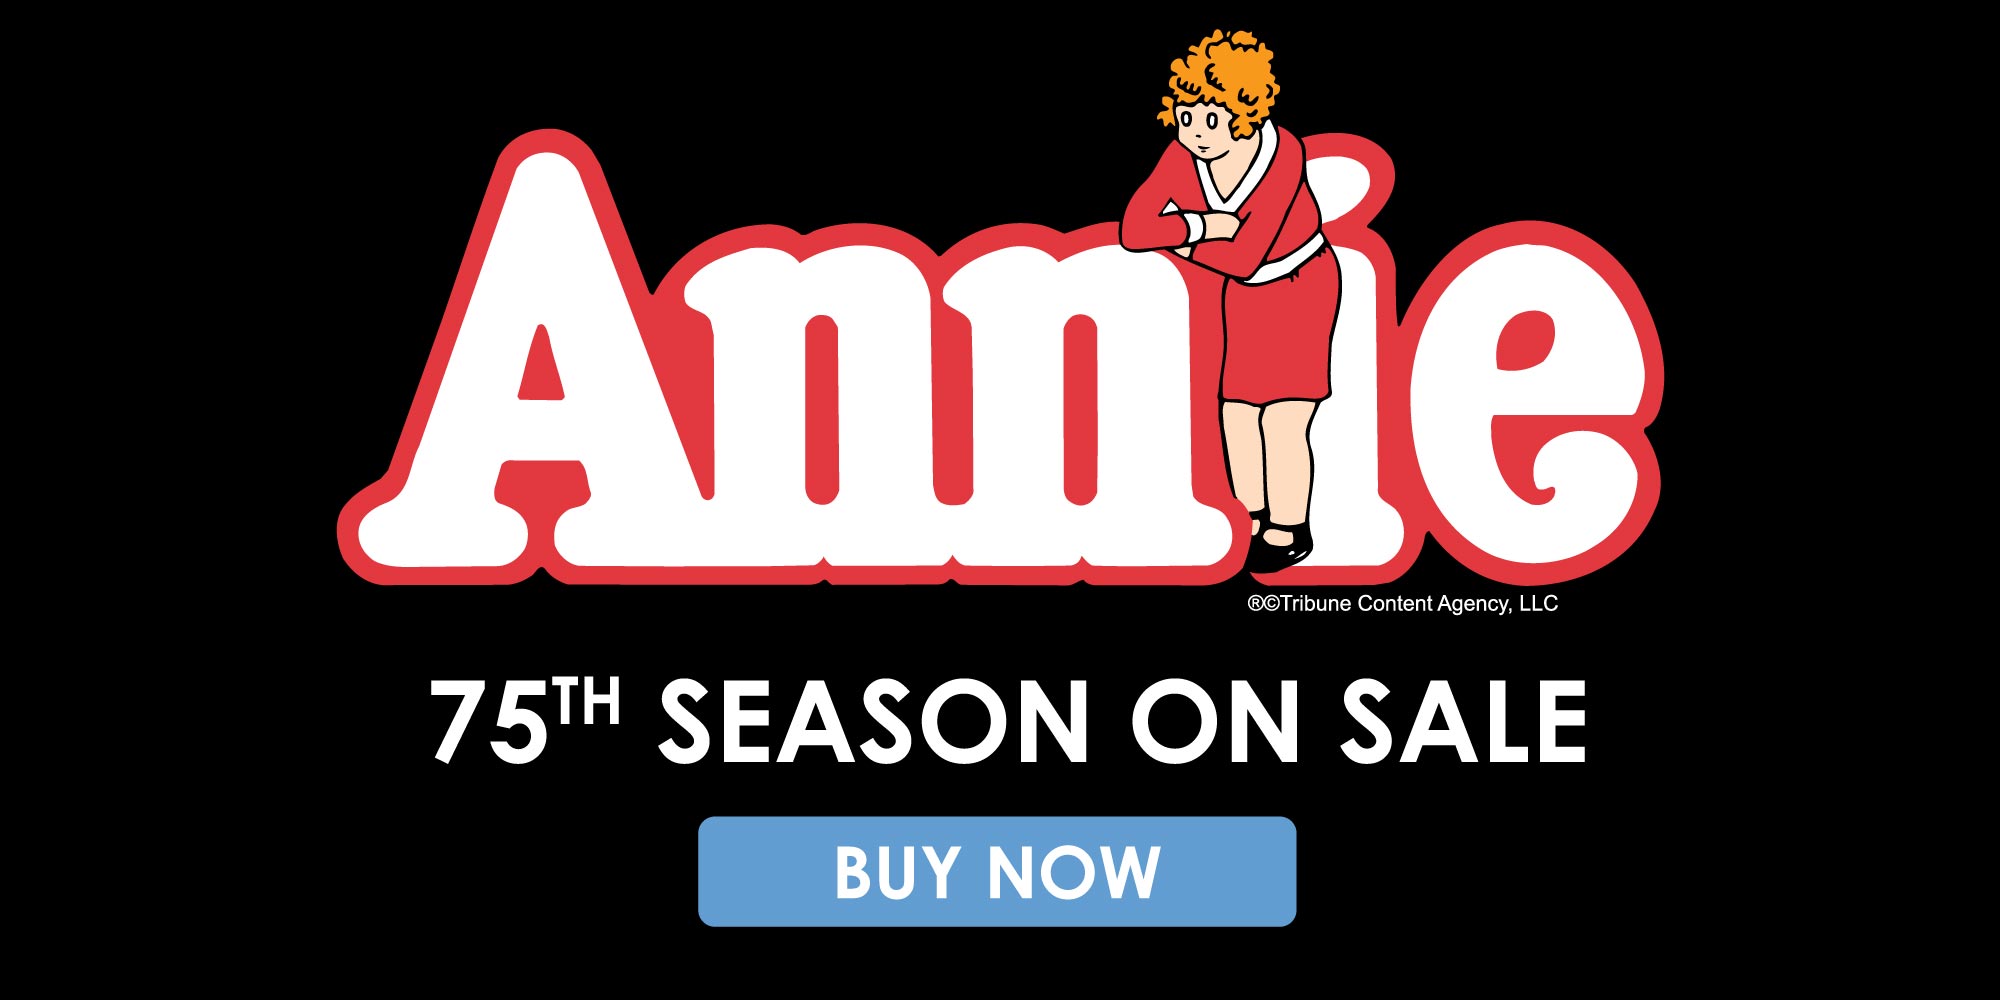 Our 75th Anniversary Season - On Sale Now!